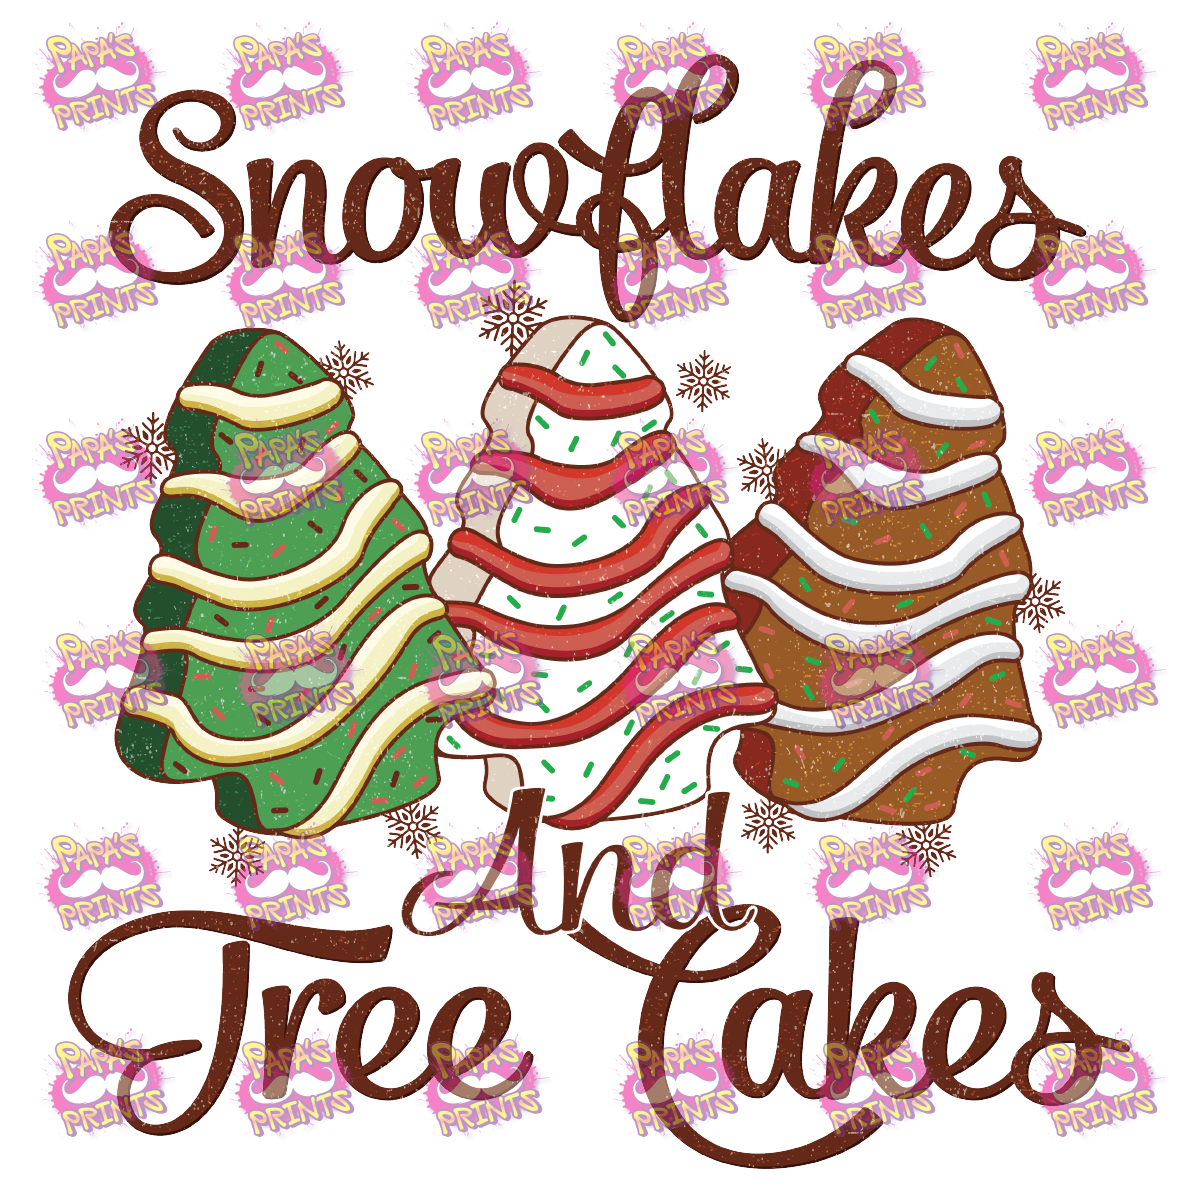 Snowflakes And Tree Cakes Damn Good Decal